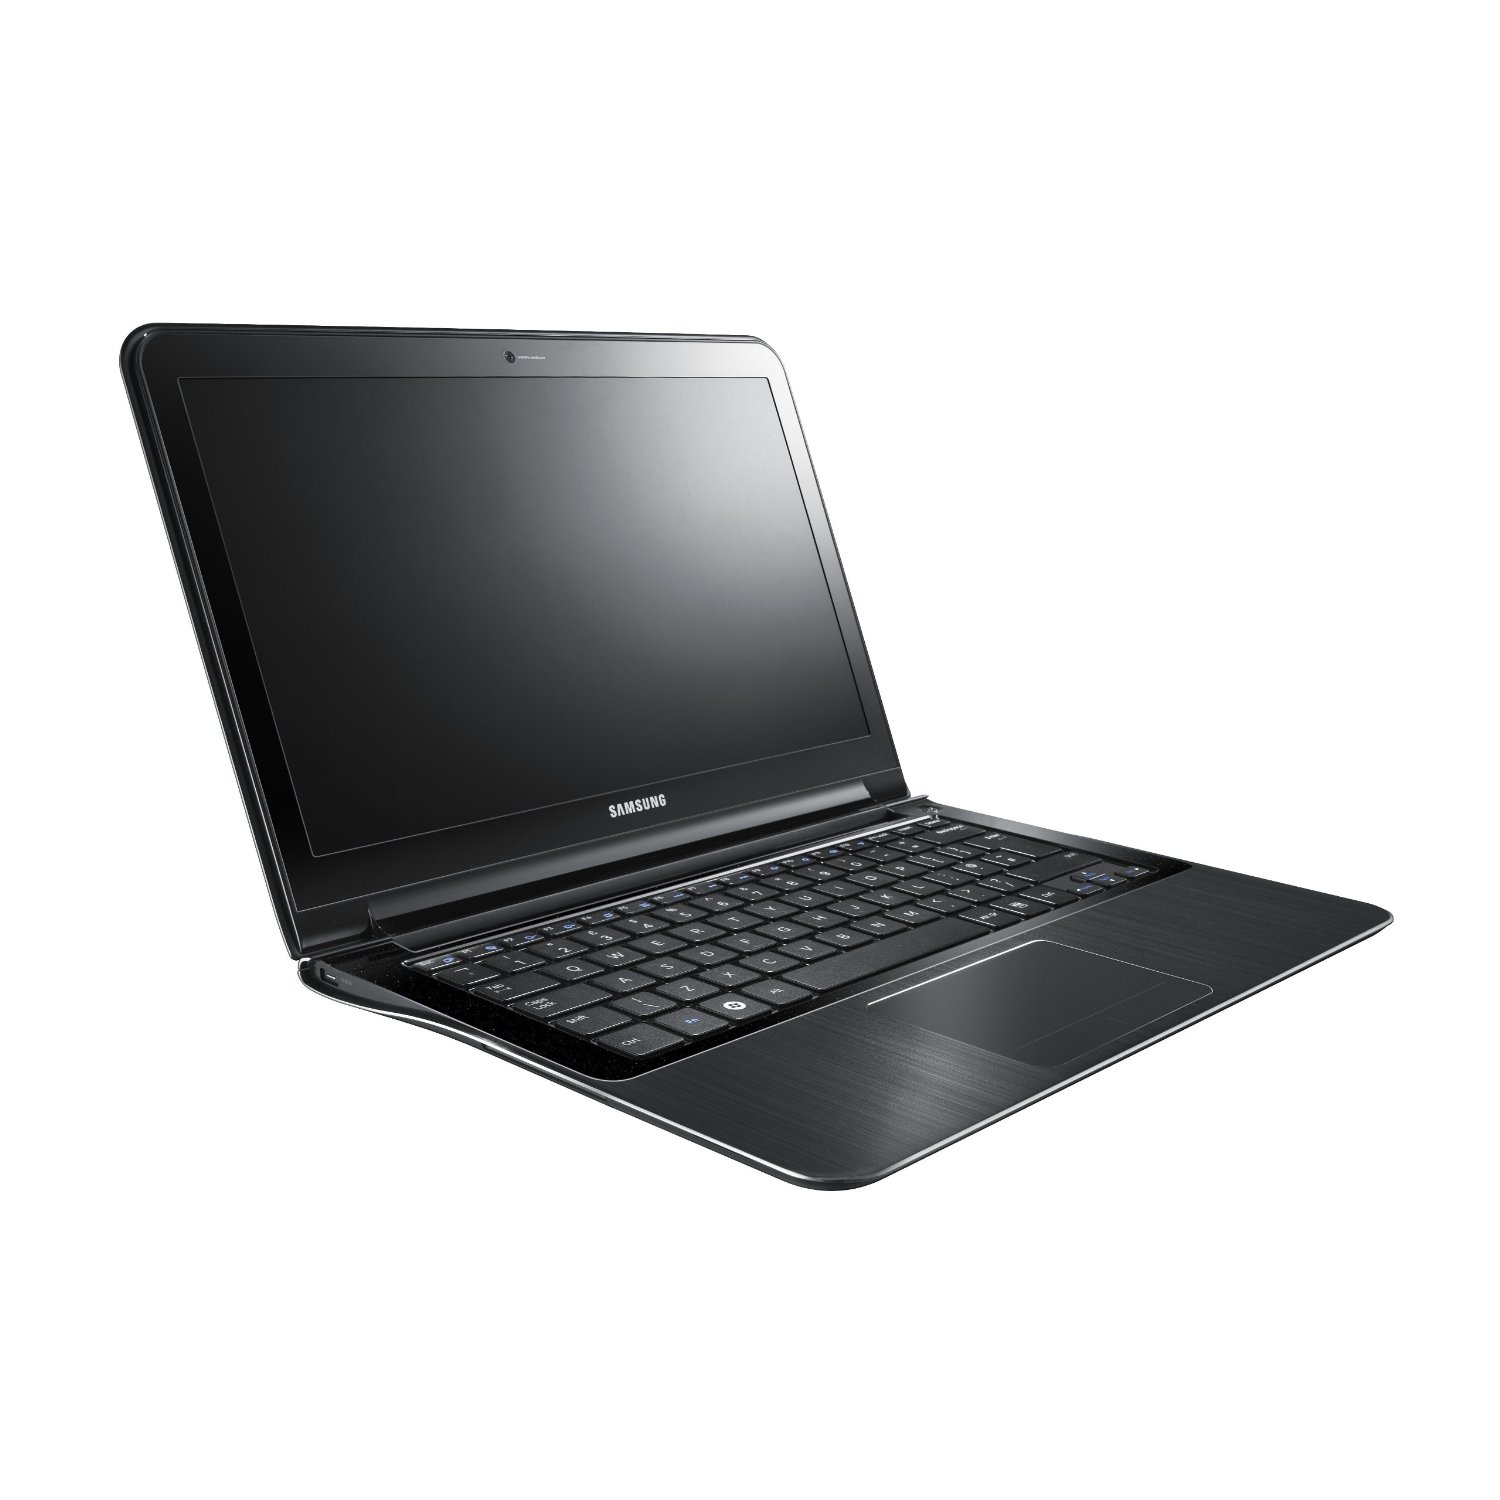 http://thetechjournal.com/wp-content/uploads/images/1109/1316665749-samsung-series-9-np900x3aa03us-133inch-laptop-7.jpg